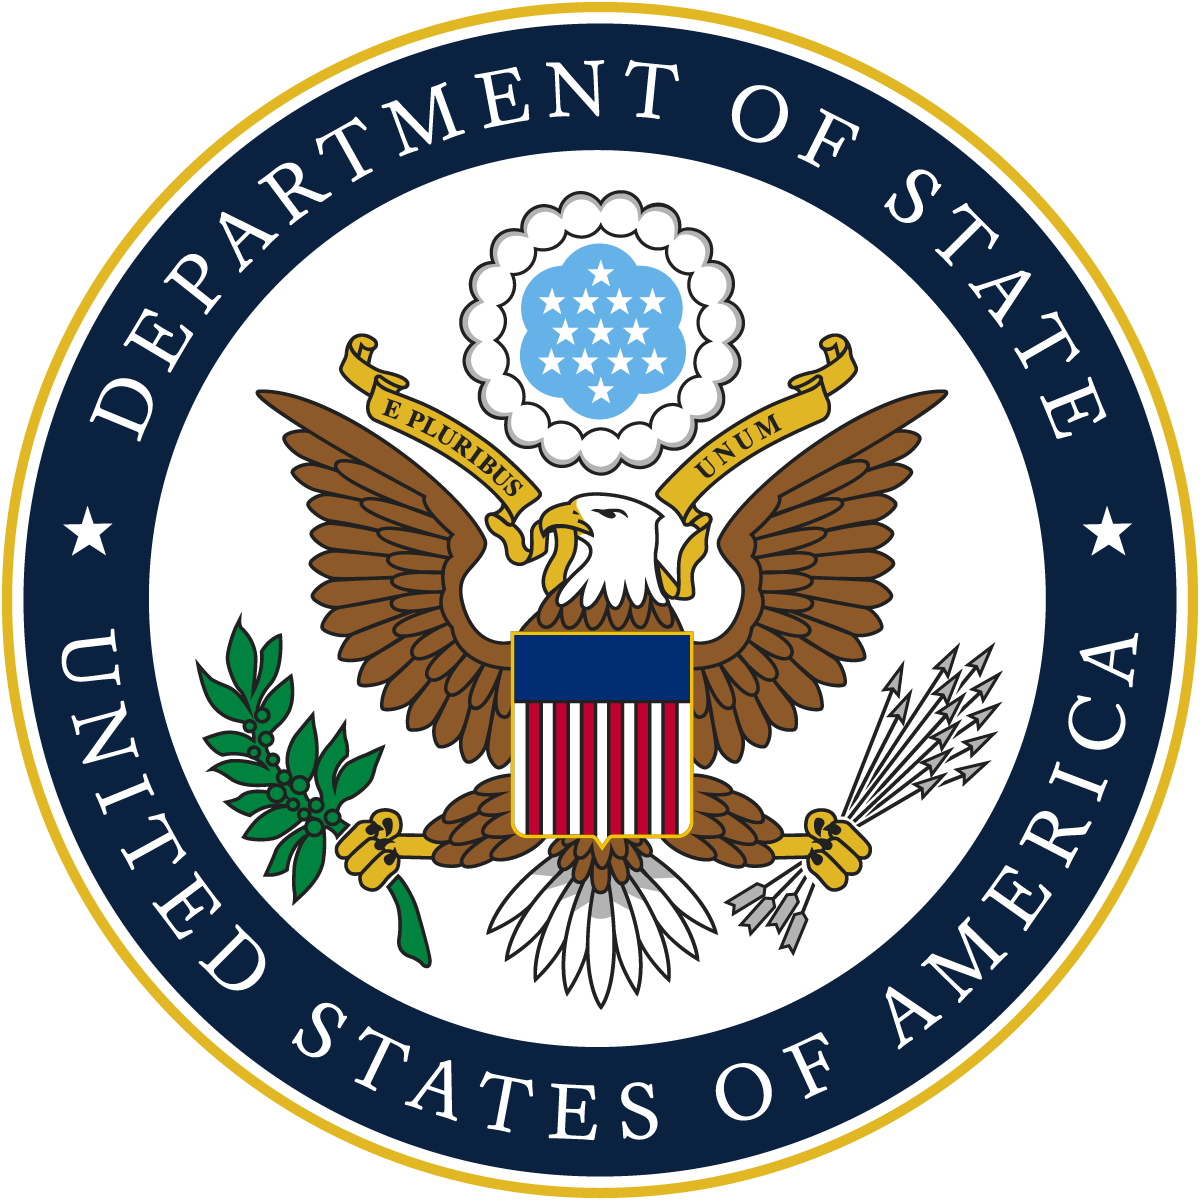 US Department of State Seal